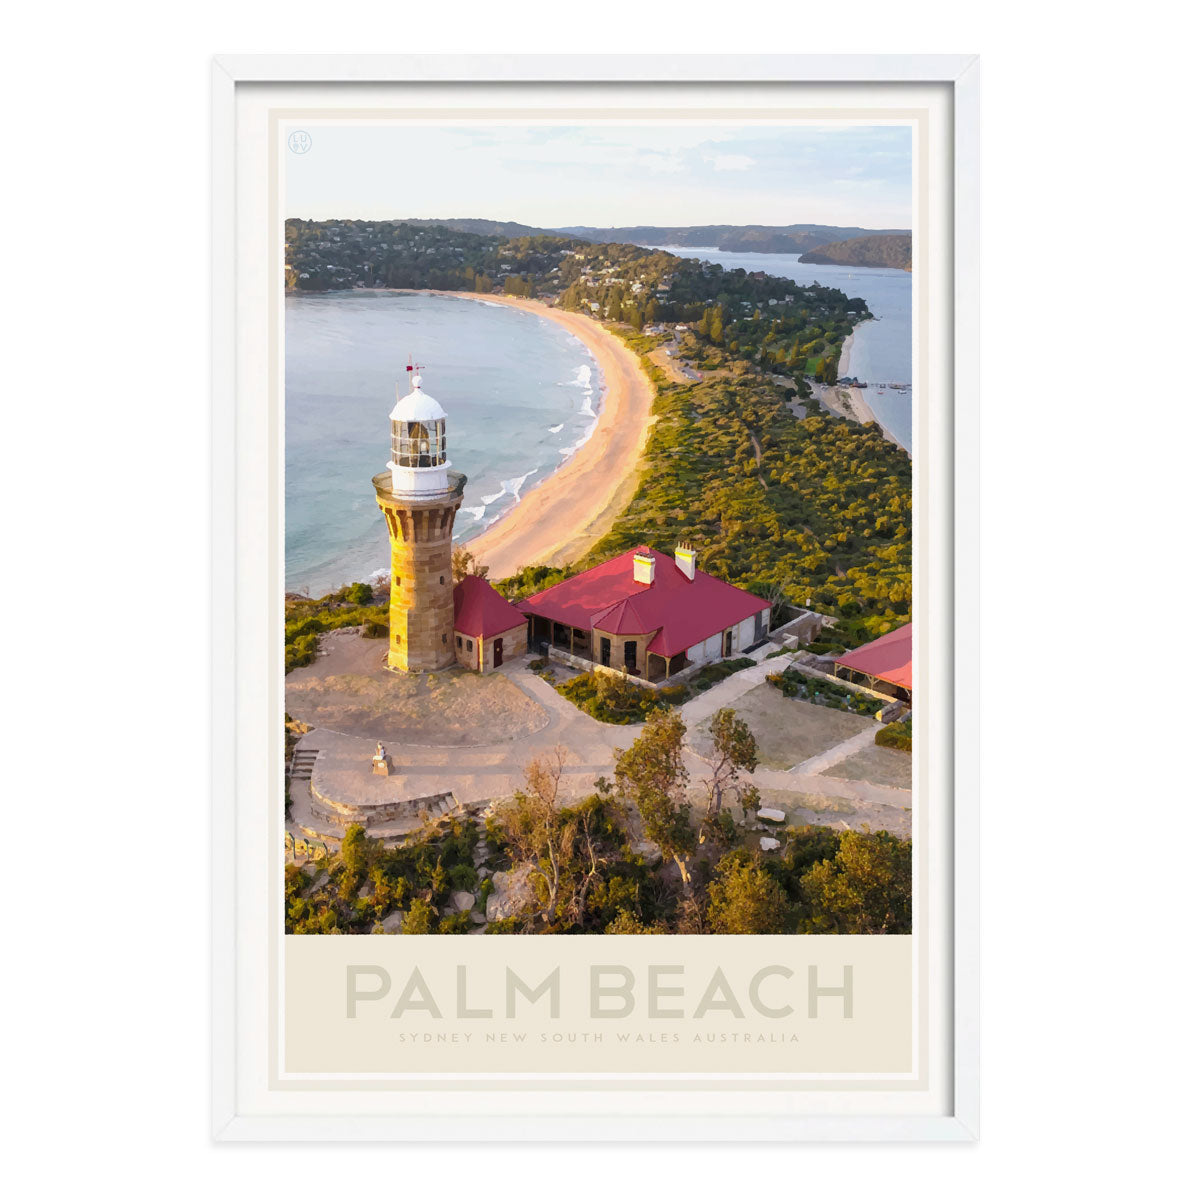 Palm Beach retro vintage travel poster print in white frame from Places We Luv